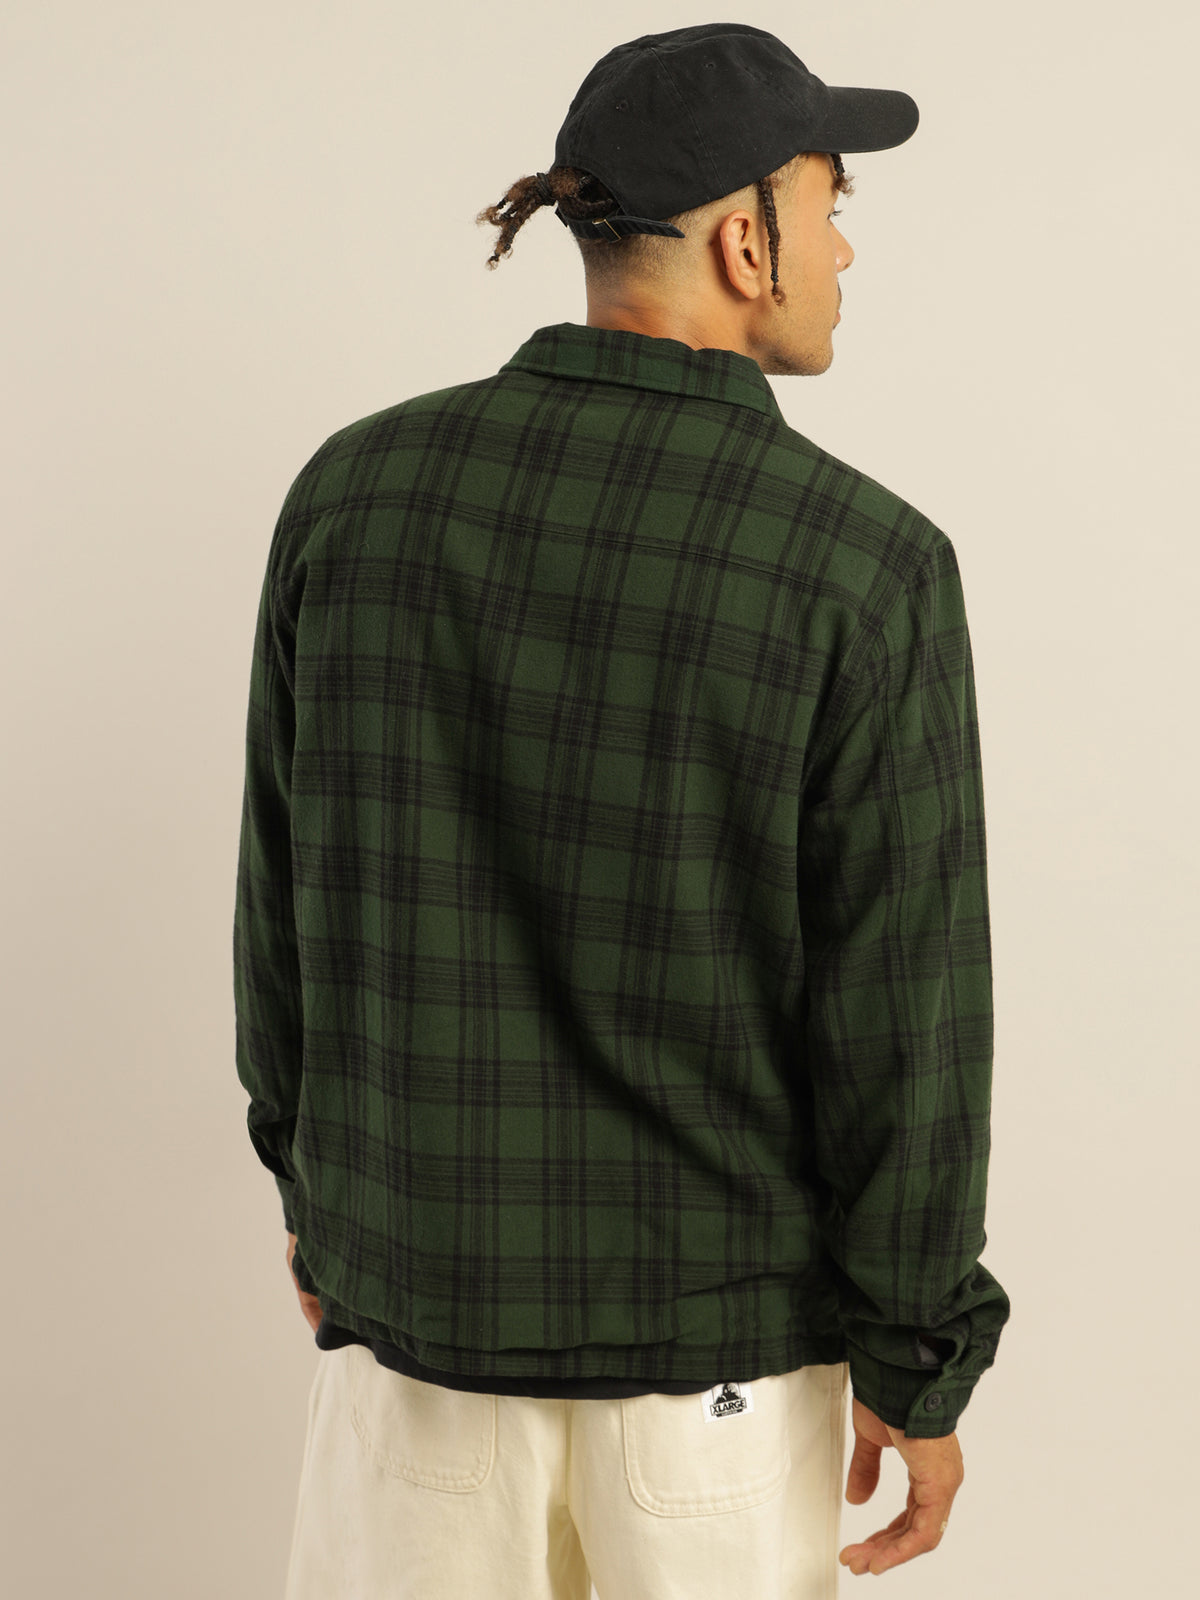 Classic Zip Up Plaid Shirt Jacket in Green